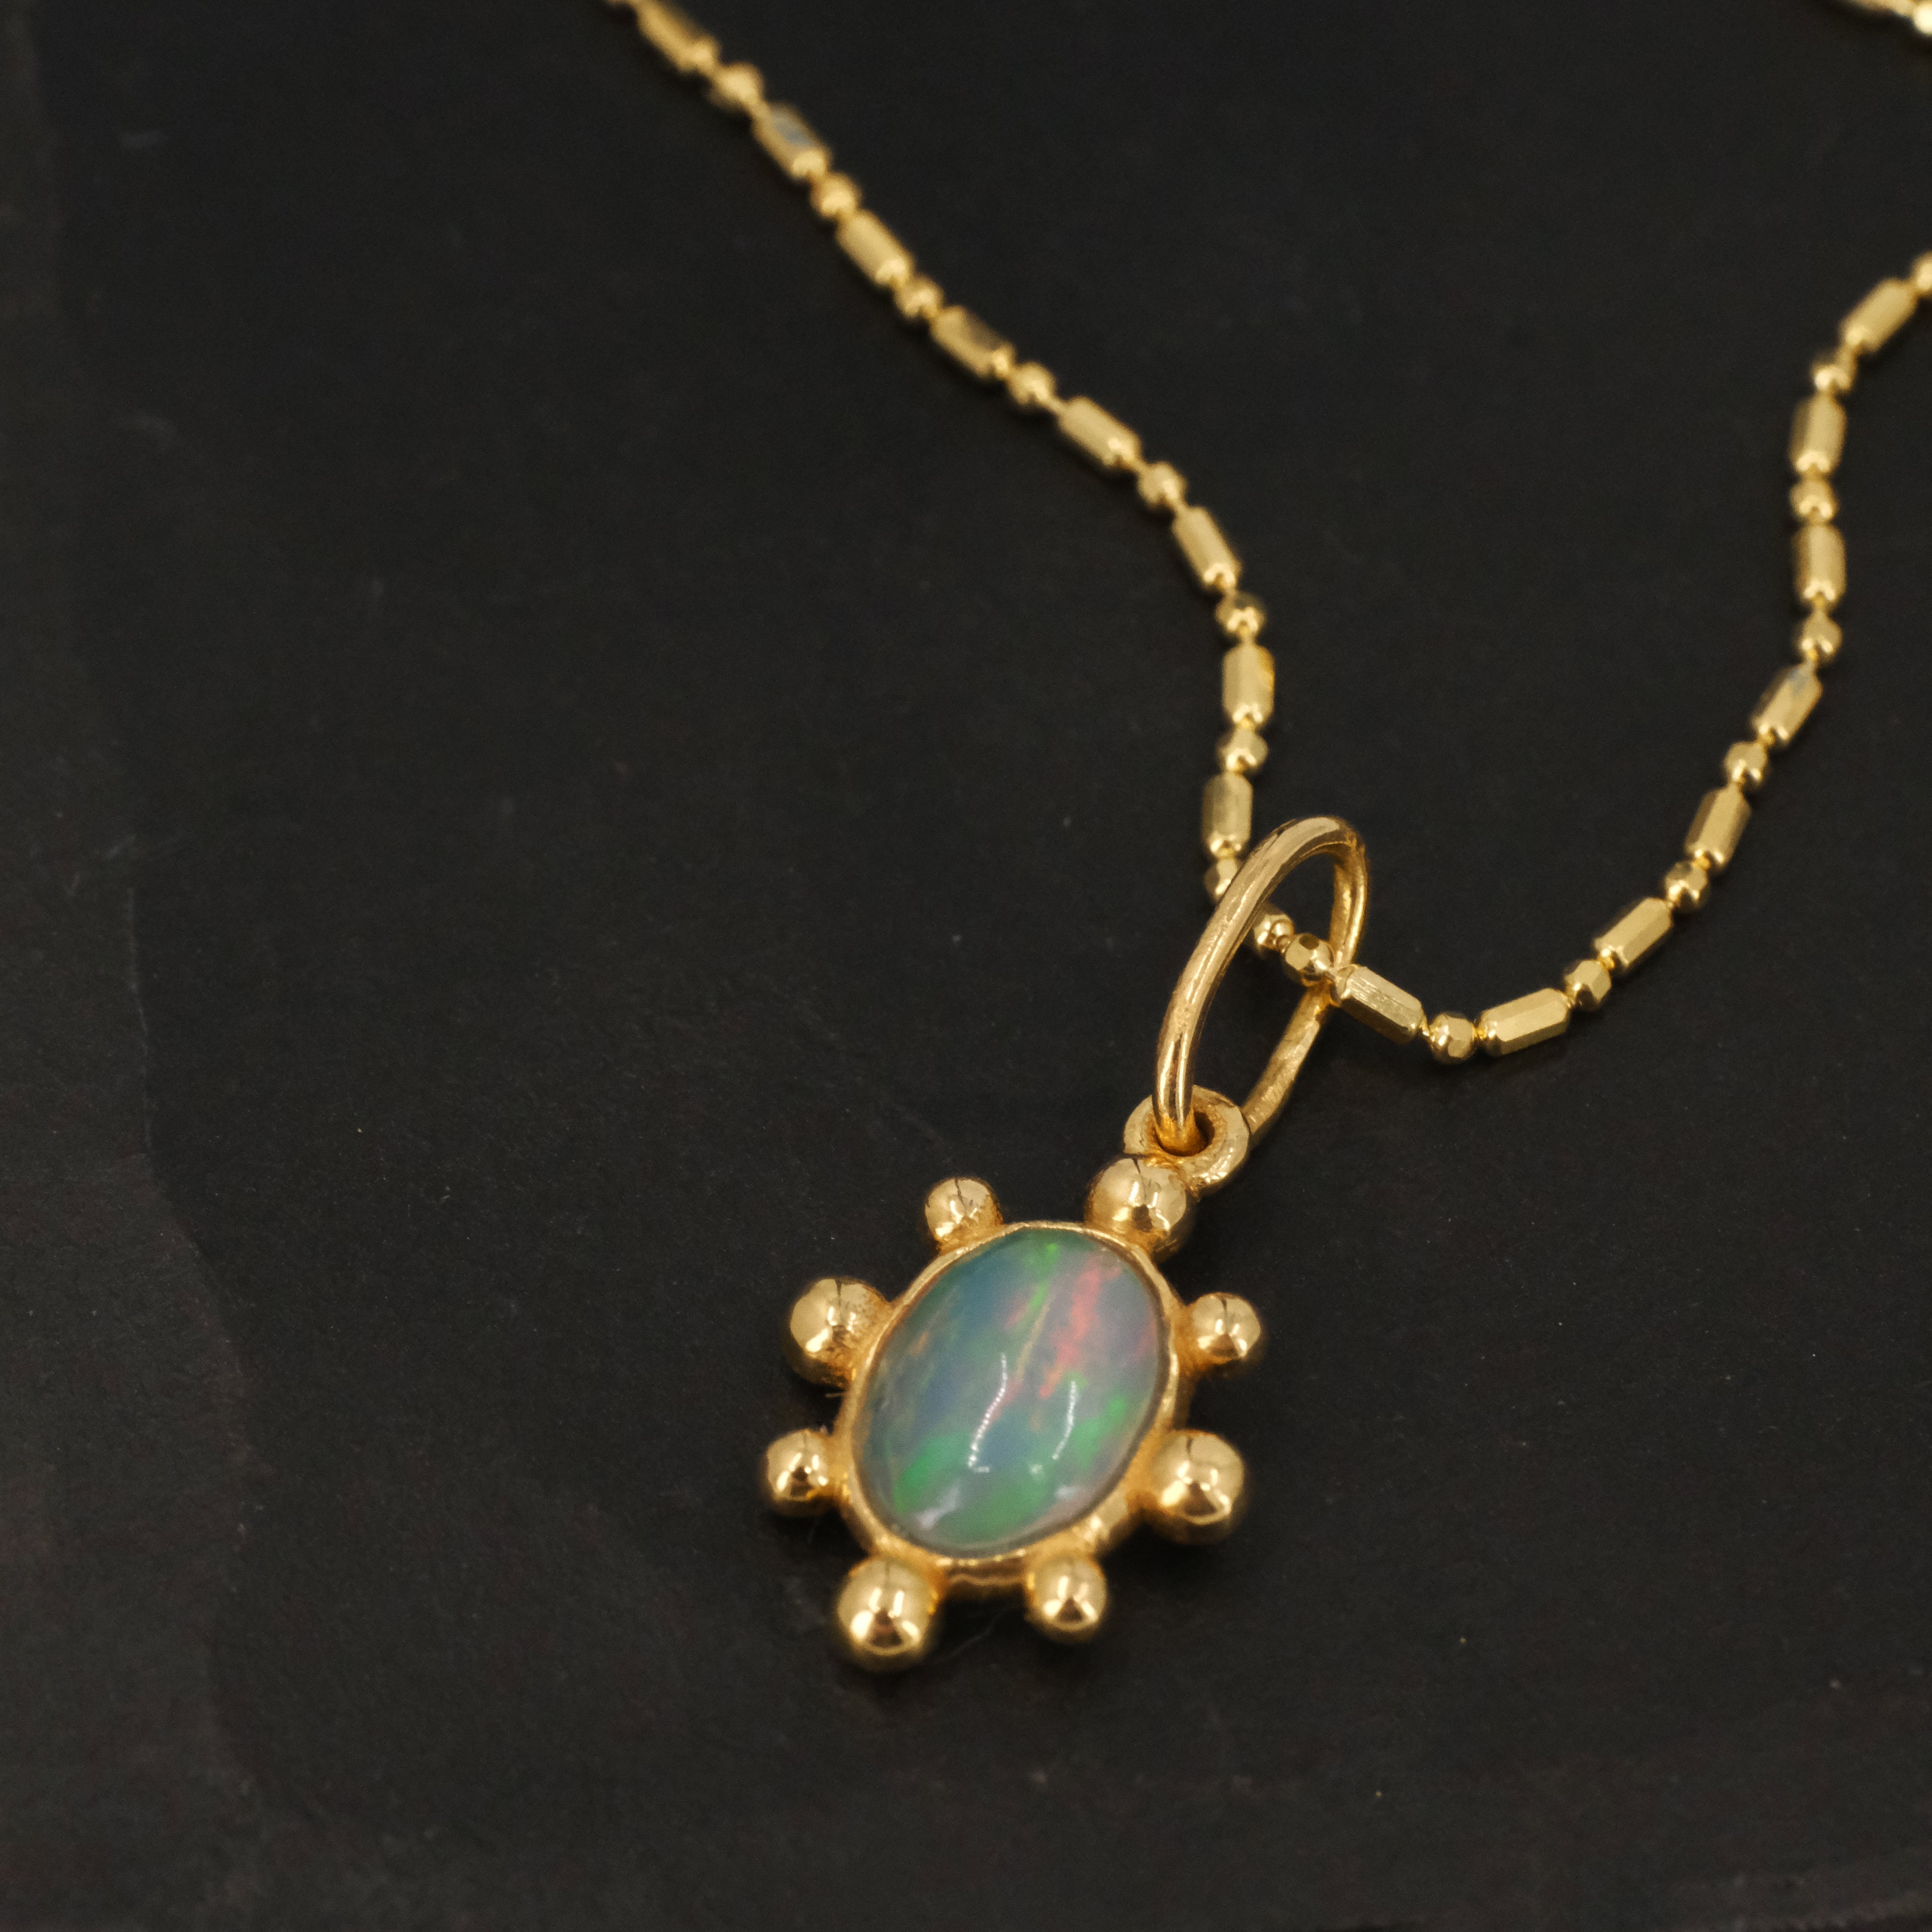 14k + Opal Sol Necklace - One of a Kind